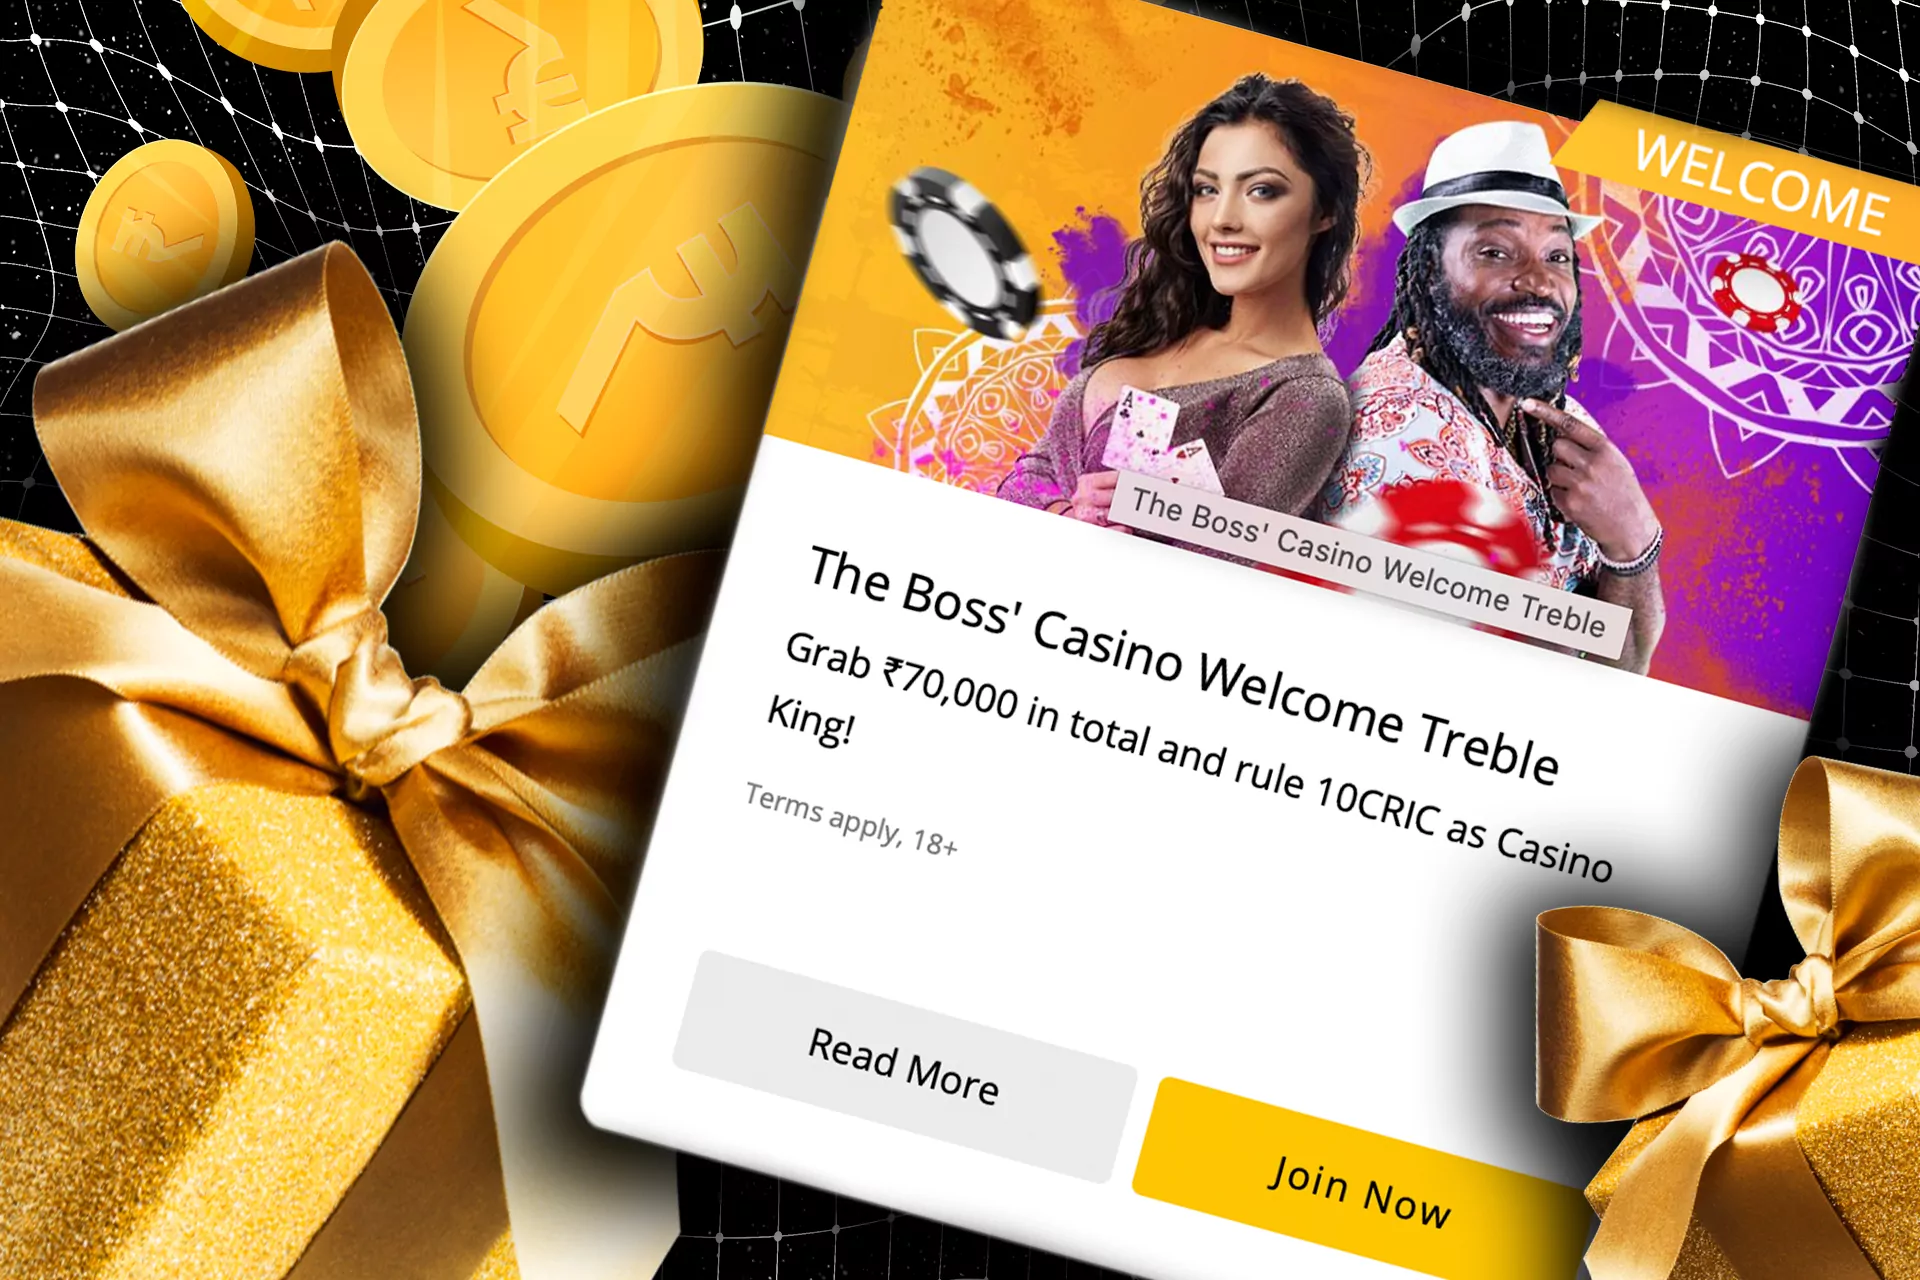 Through the 3 first deposits, you can get up to 70000 INR as a bonus on playing casino games.